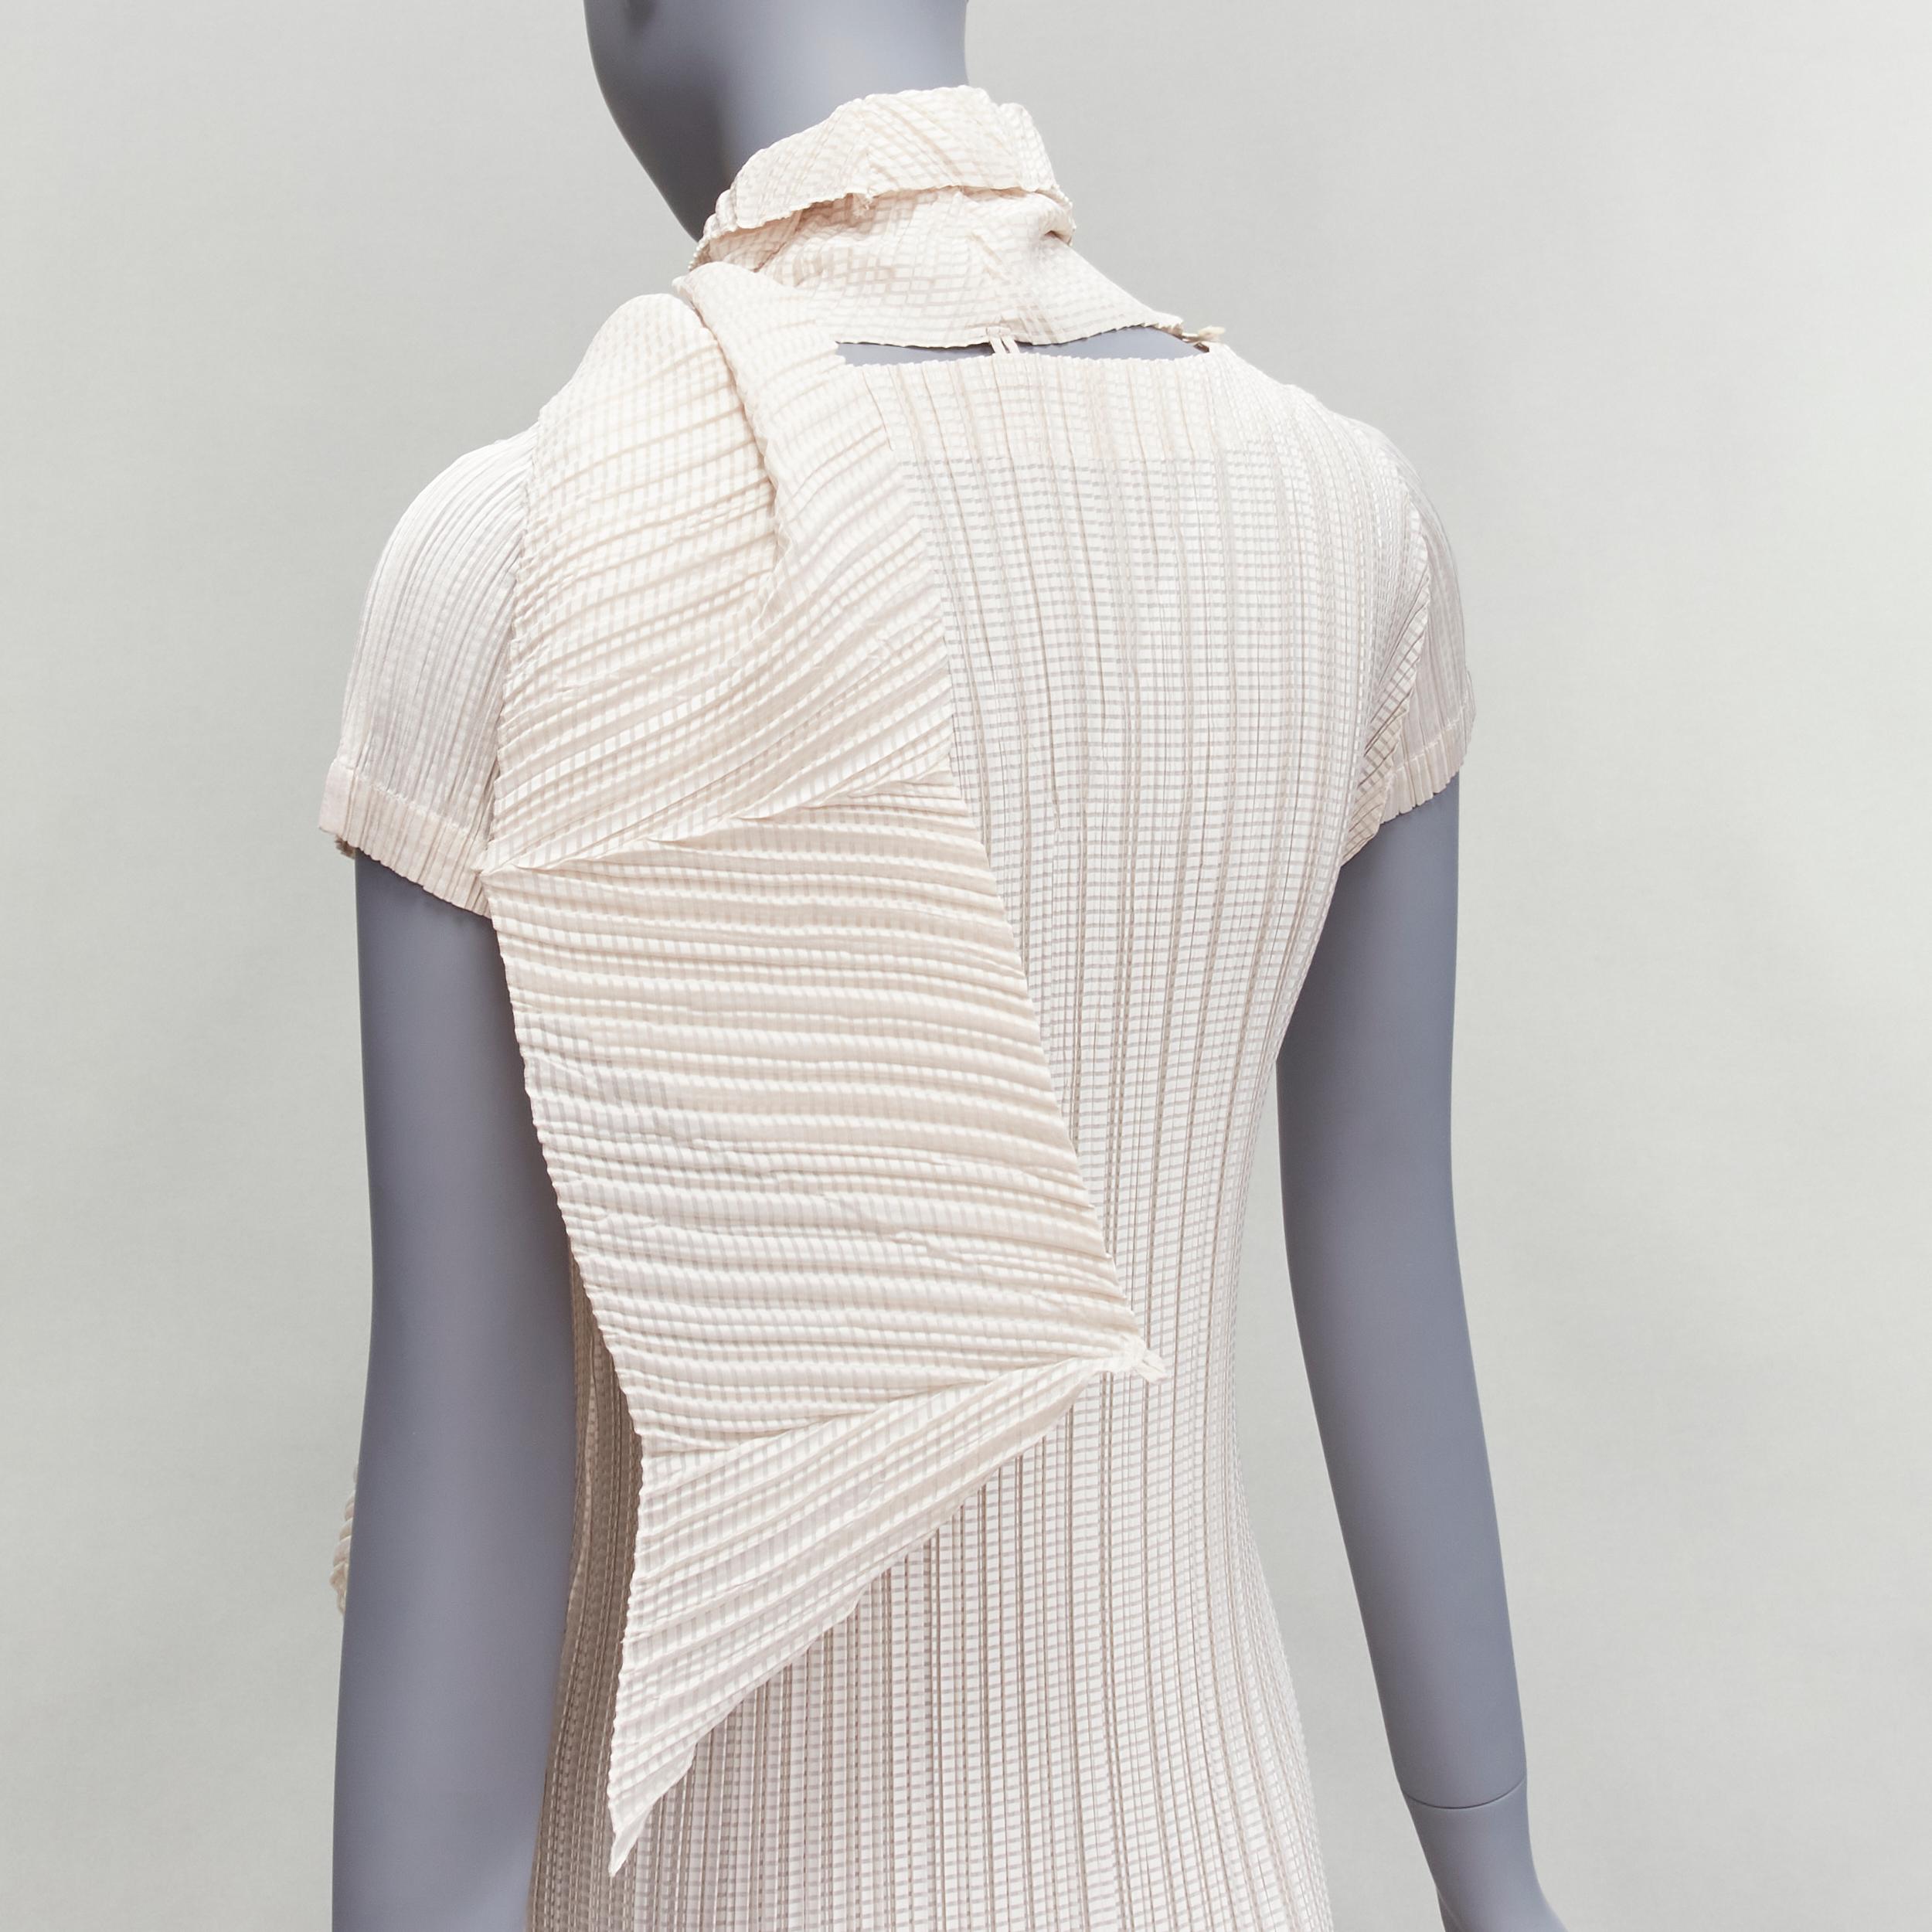 ISSEY MIYAKE cream horizontal stripe plisse V neck midi dress JP2 M
Reference: TGAS/D00069
Brand: Issey Miyake
Material: Polyester
Color: Cream
Pattern: Solid
Closure: Elasticated
Extra Details: Scarf tie is detachable.
Made in: